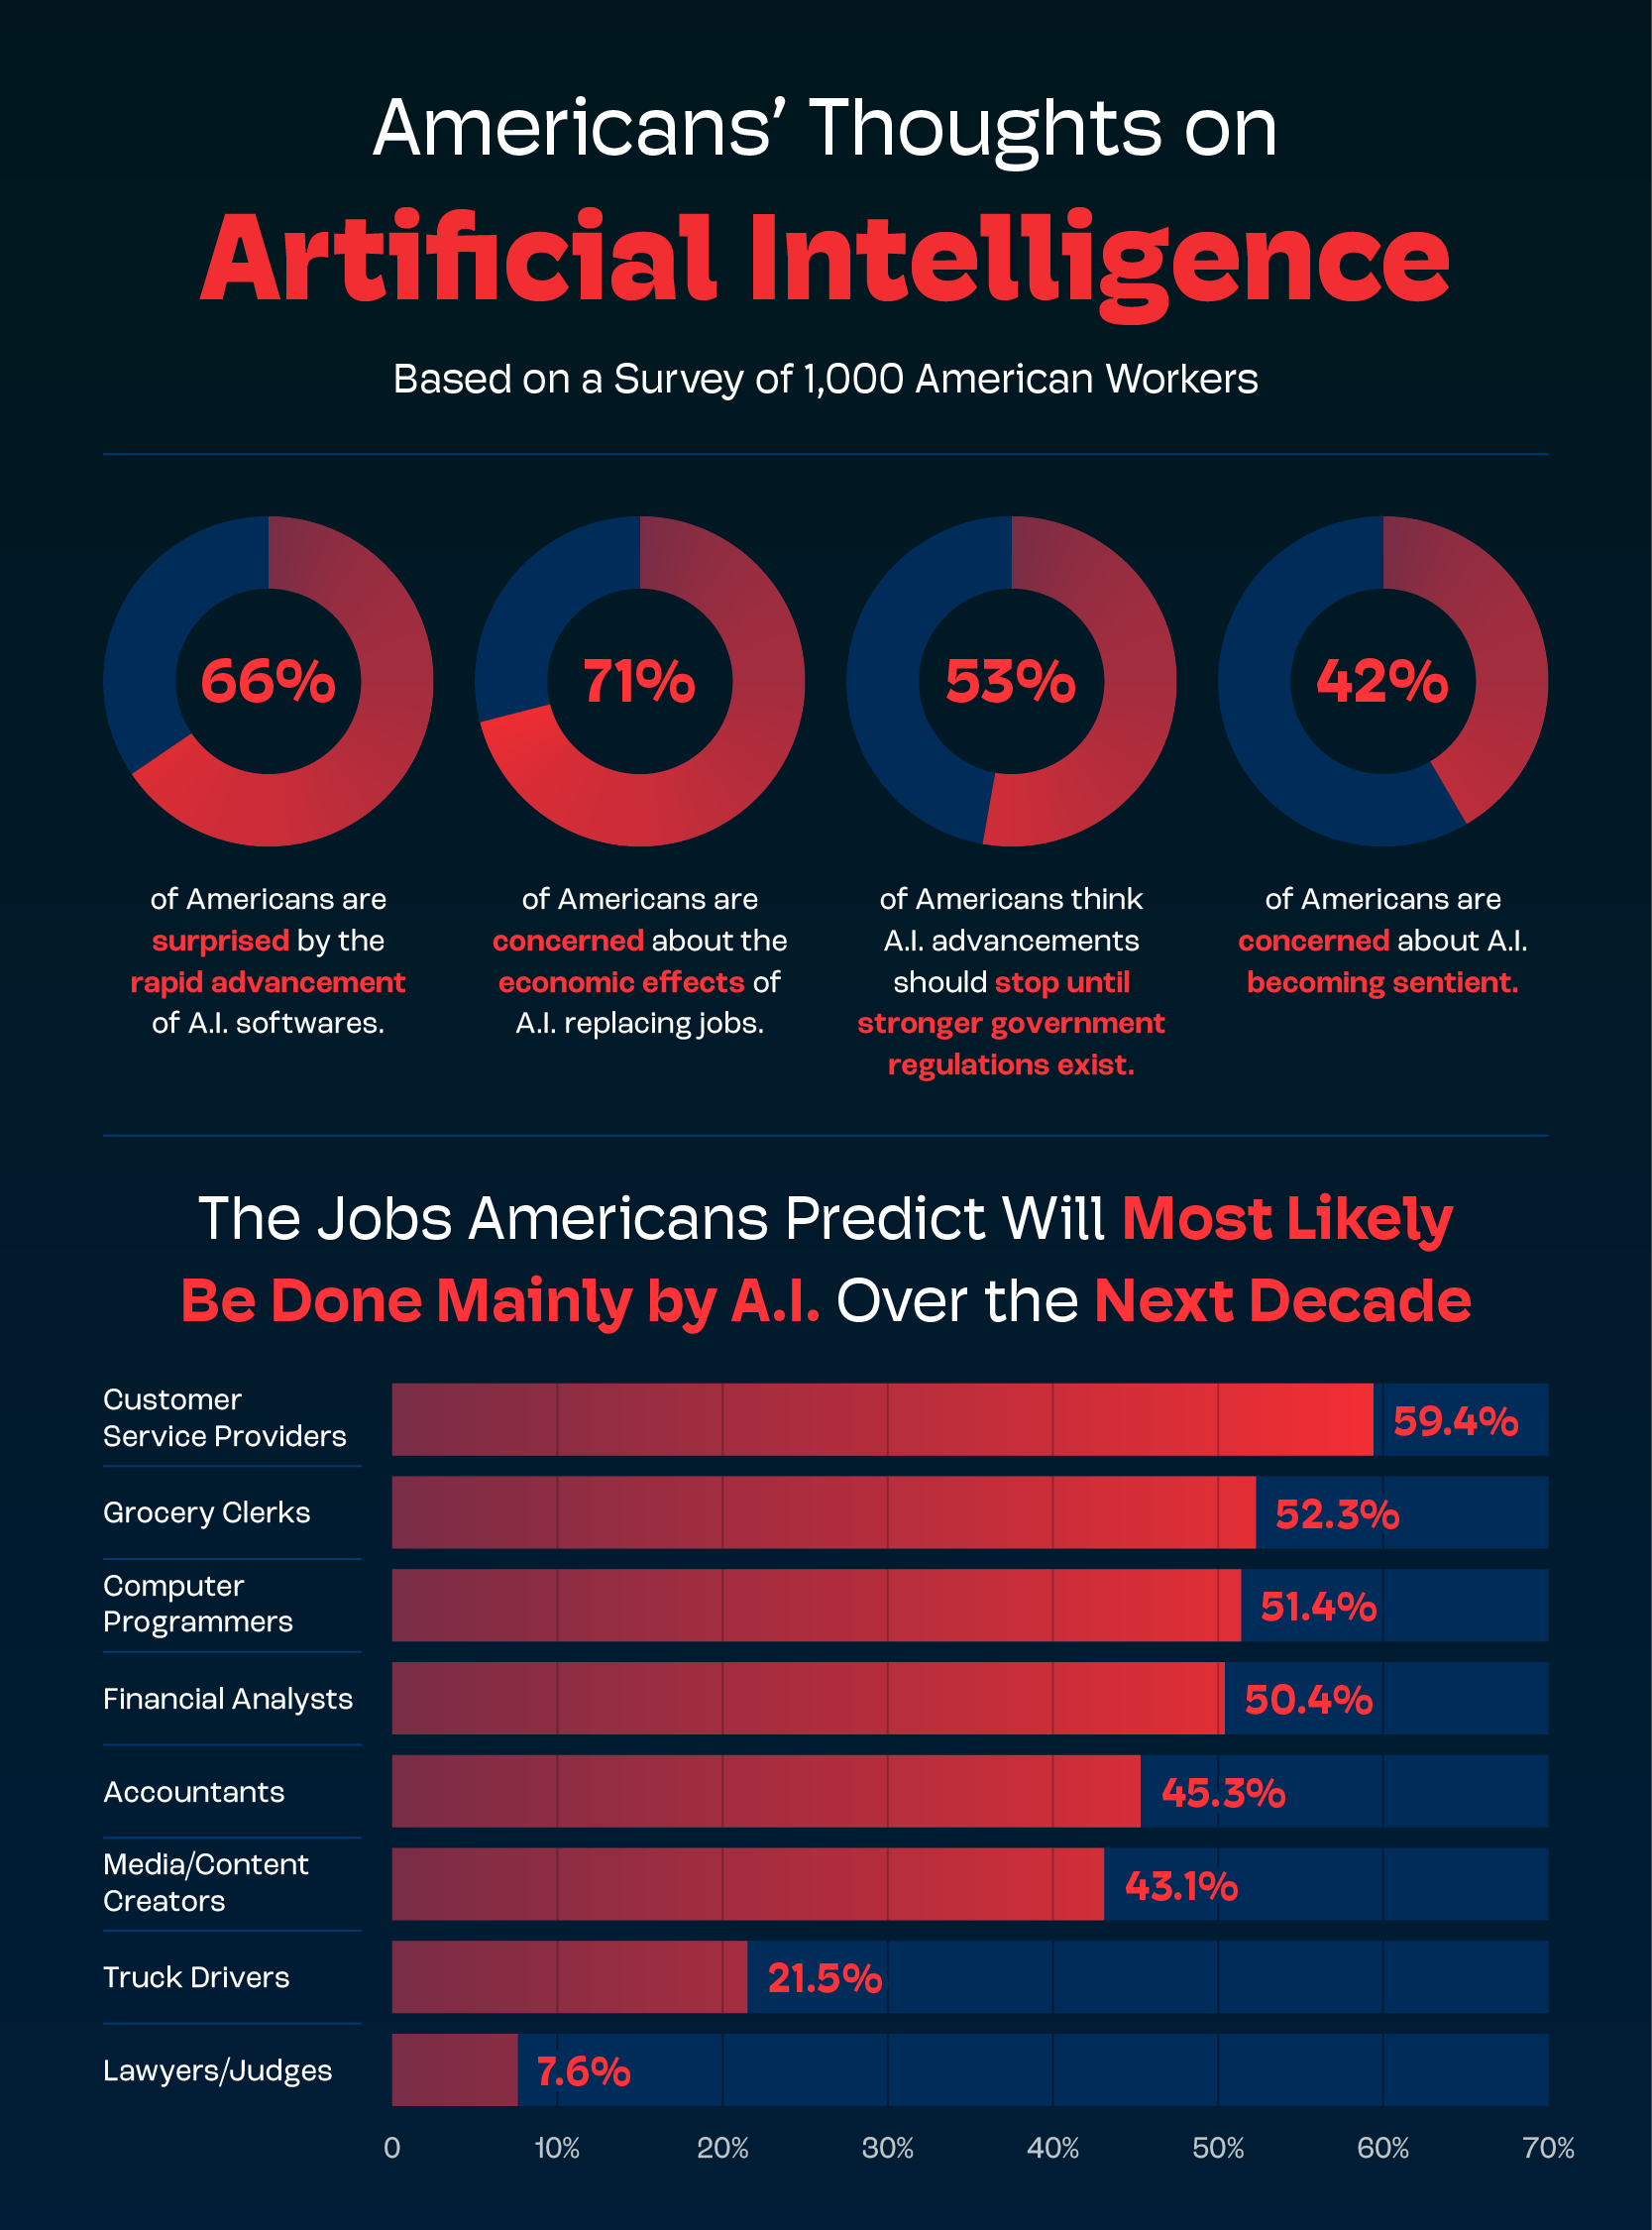 An infographic showing results from a survey about how Americans generally view artificial intelligence.